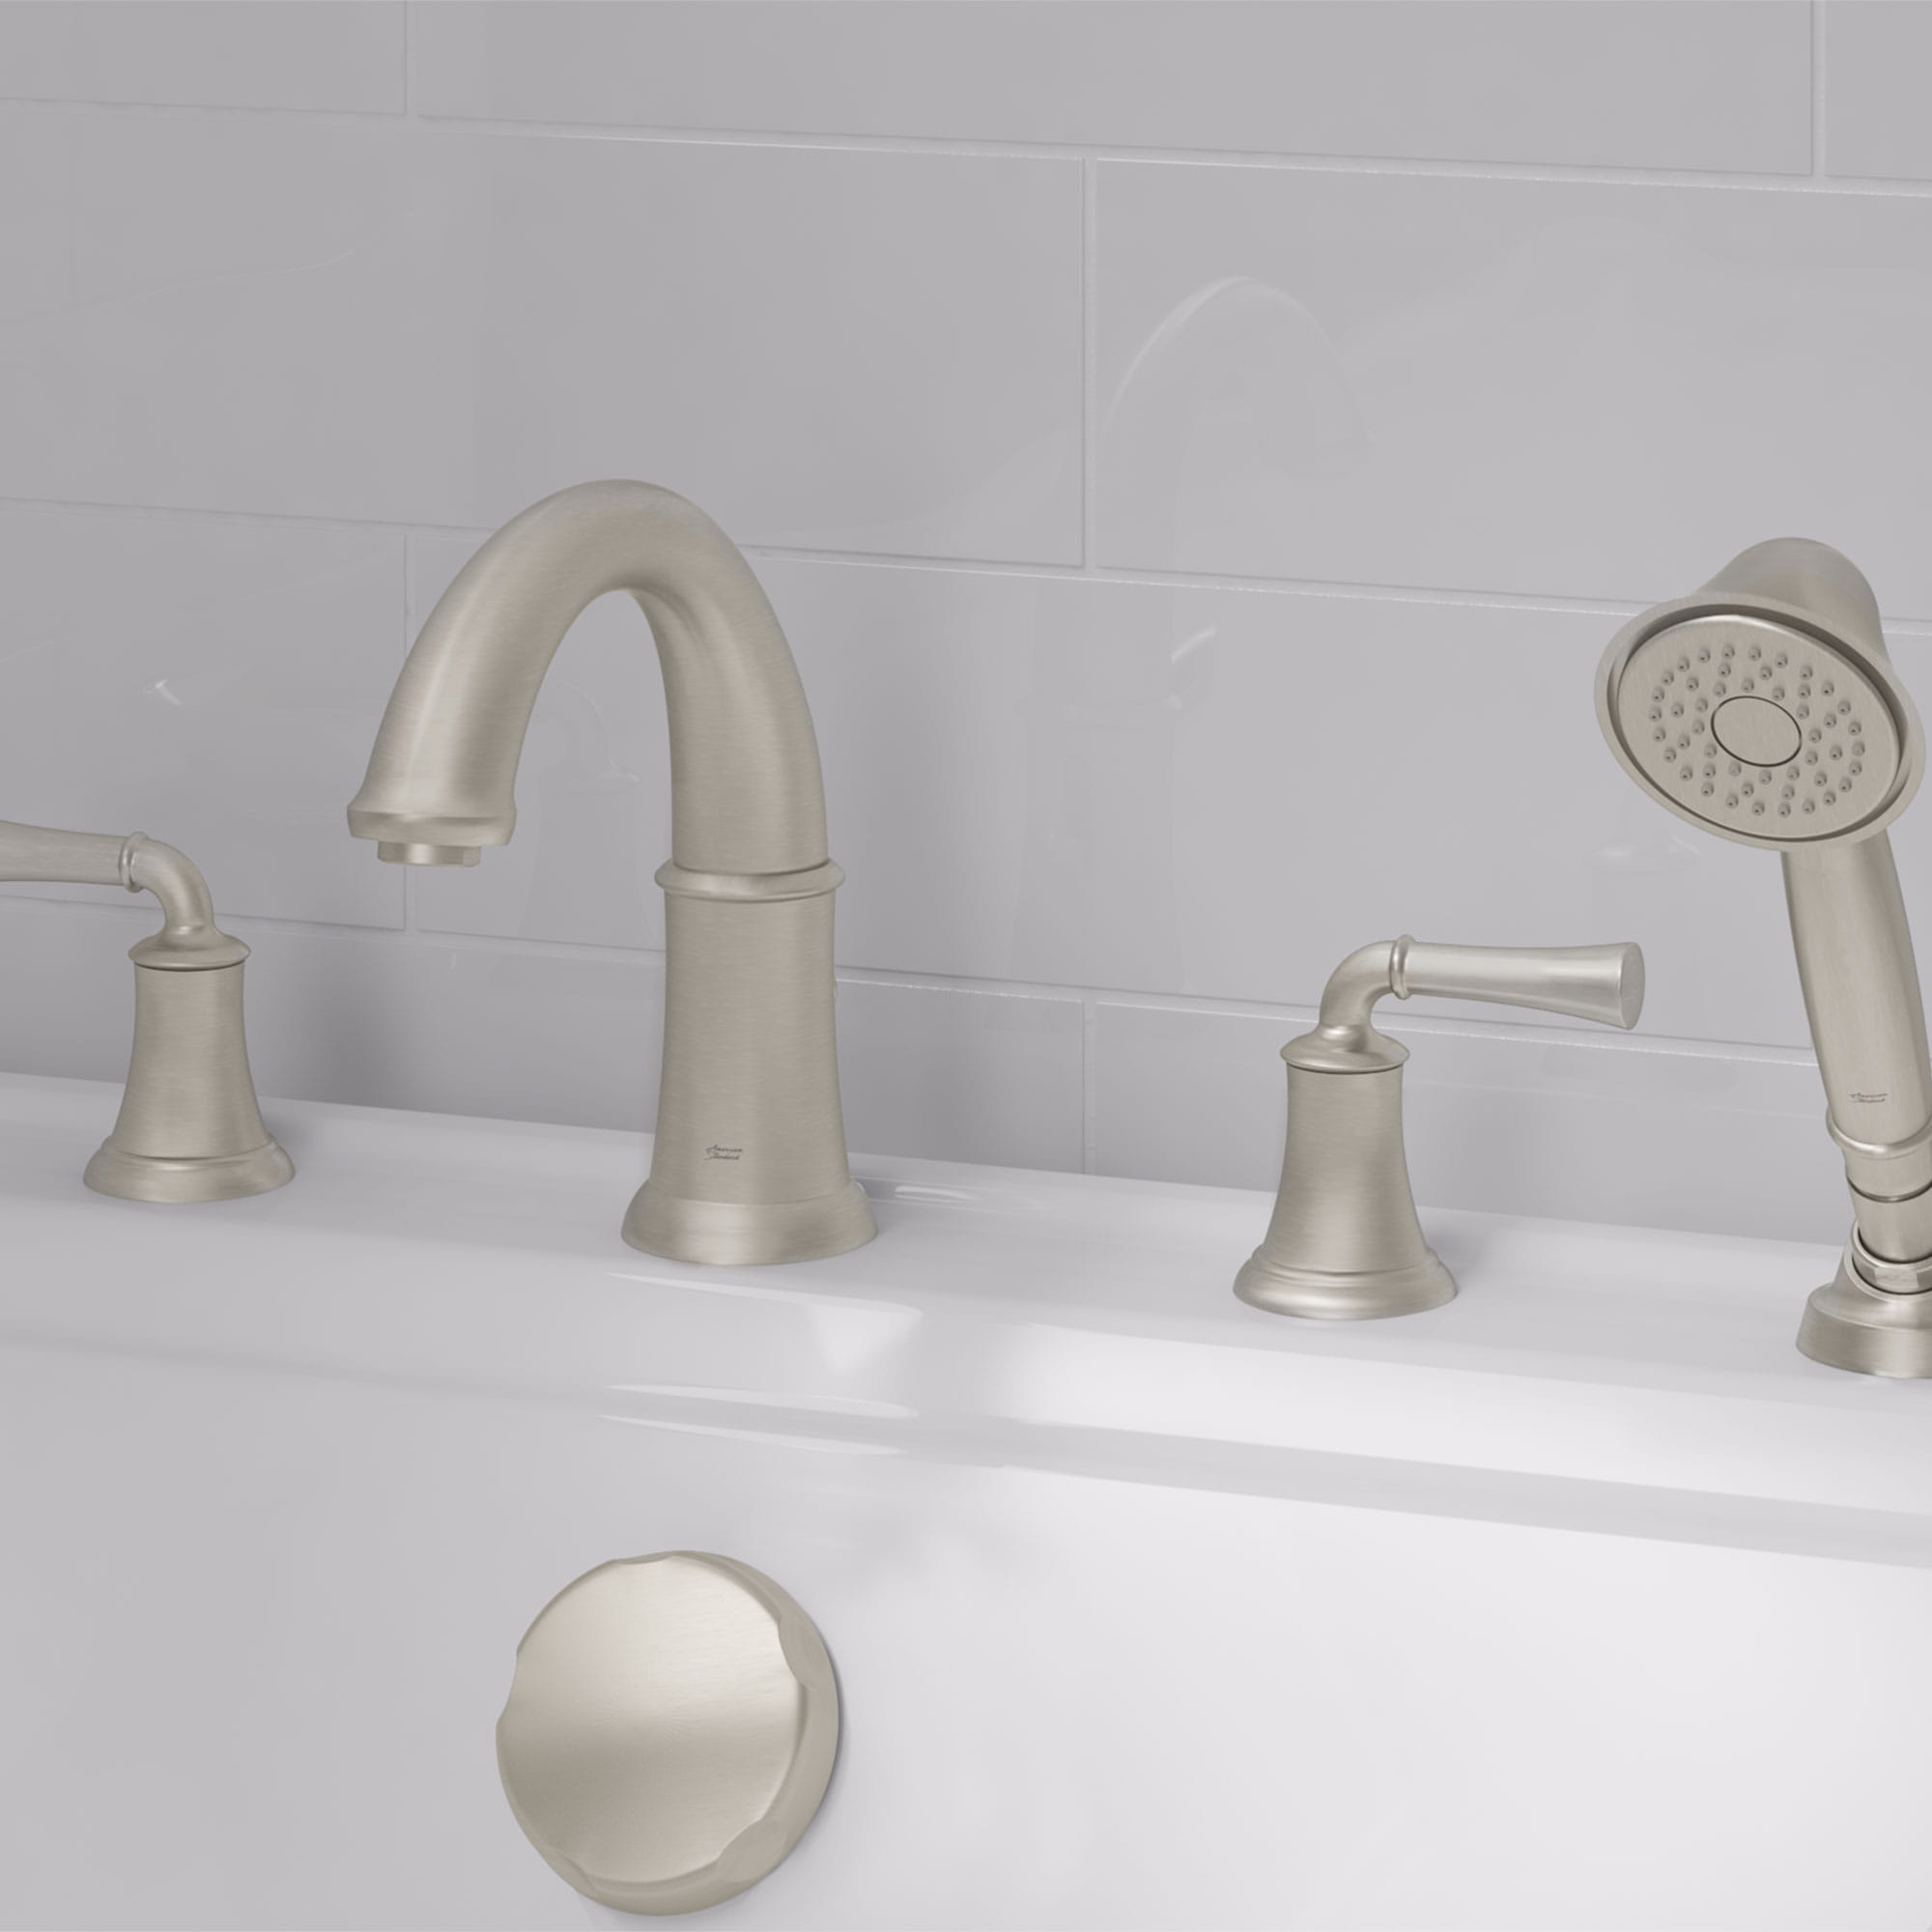 Portsmouth Bathtub Faucet with Personal Shower for Flash Rough in Valve with Lever Handles   BRUSHED NICKEL